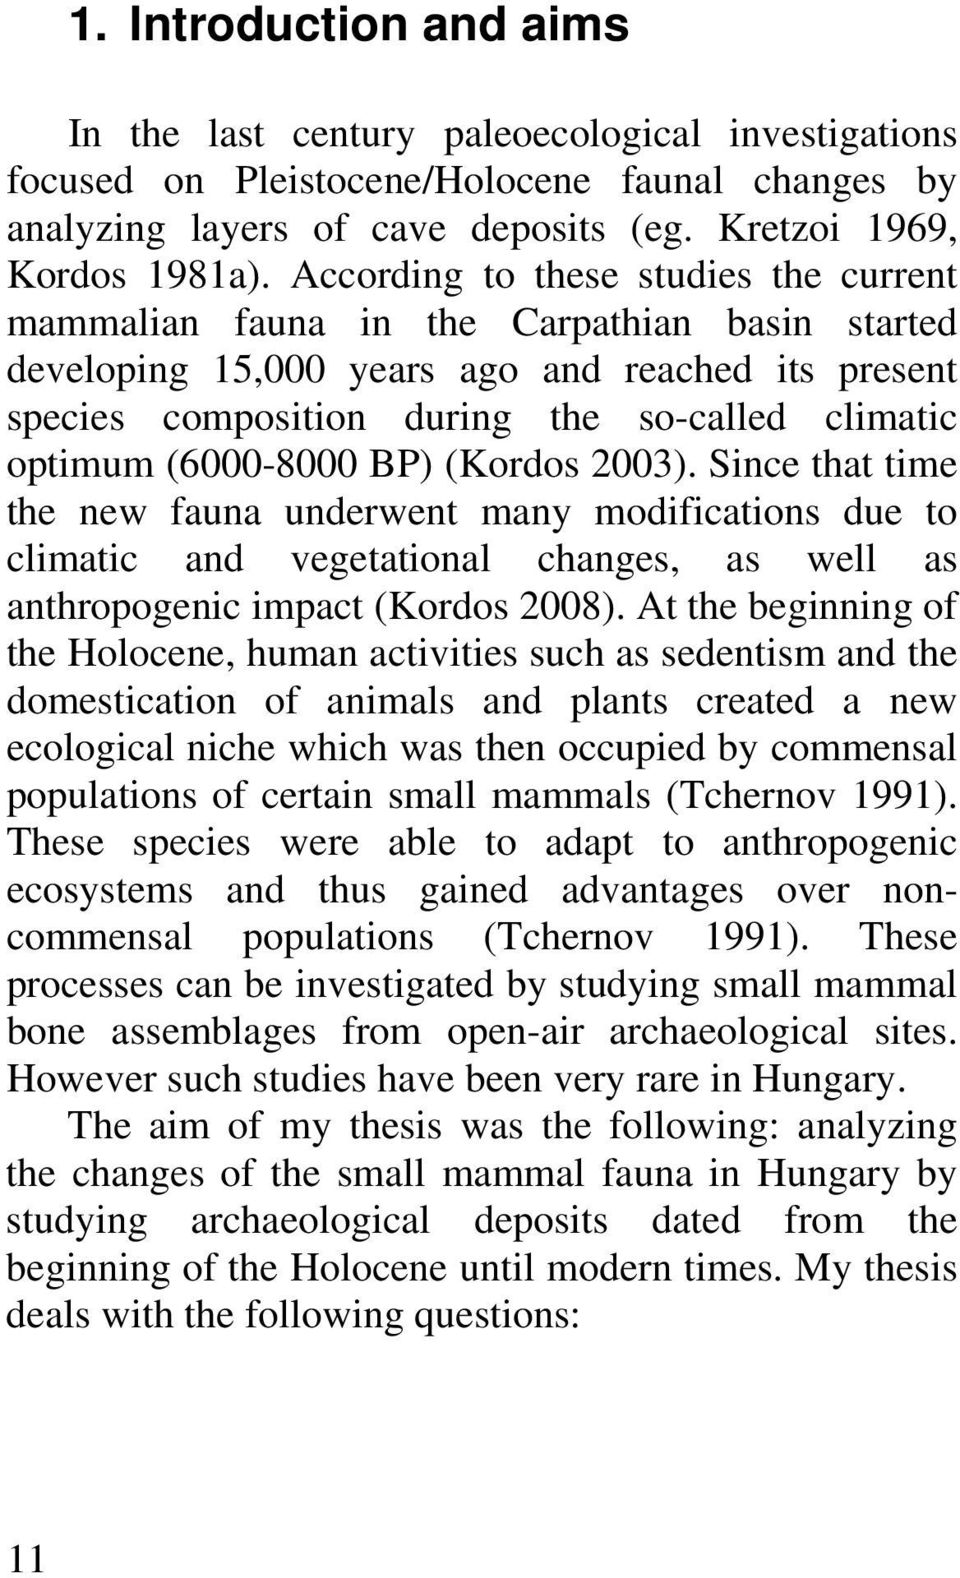 (6000-8000 BP) (Kordos 2003). Since that time the new fauna underwent many modifications due to climatic and vegetational changes, as well as anthropogenic impact (Kordos 2008).